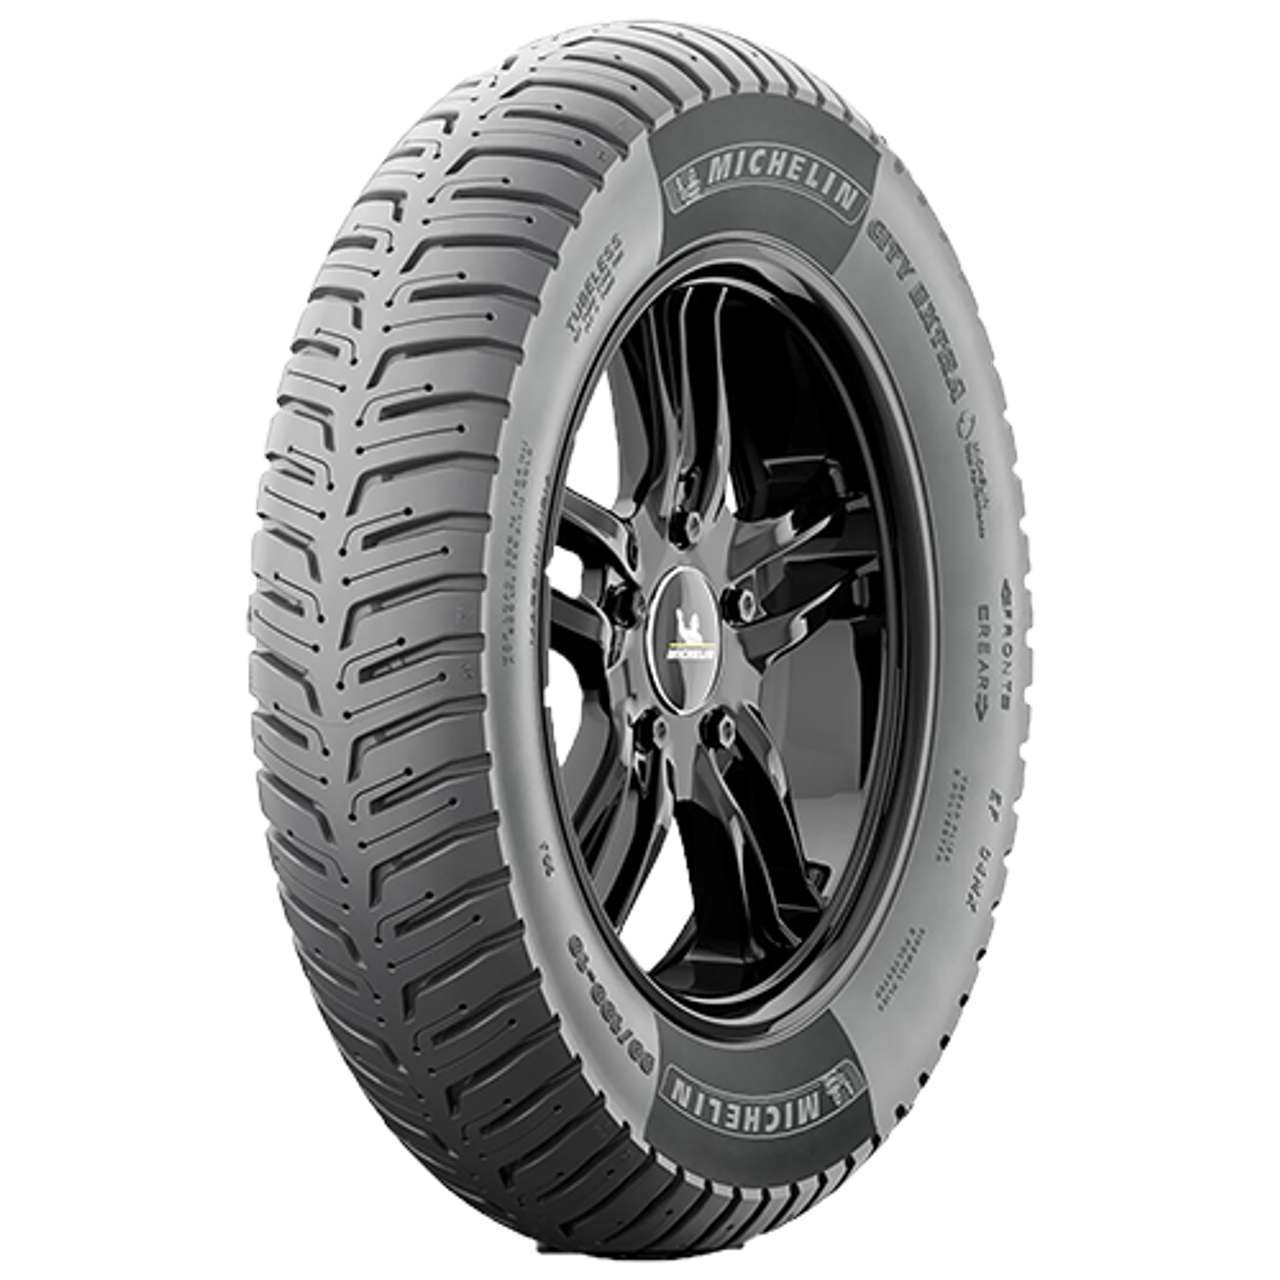 MICHELIN CITY EXTRA 120/80 - 16 M/C TL 60S FRONT/REAR